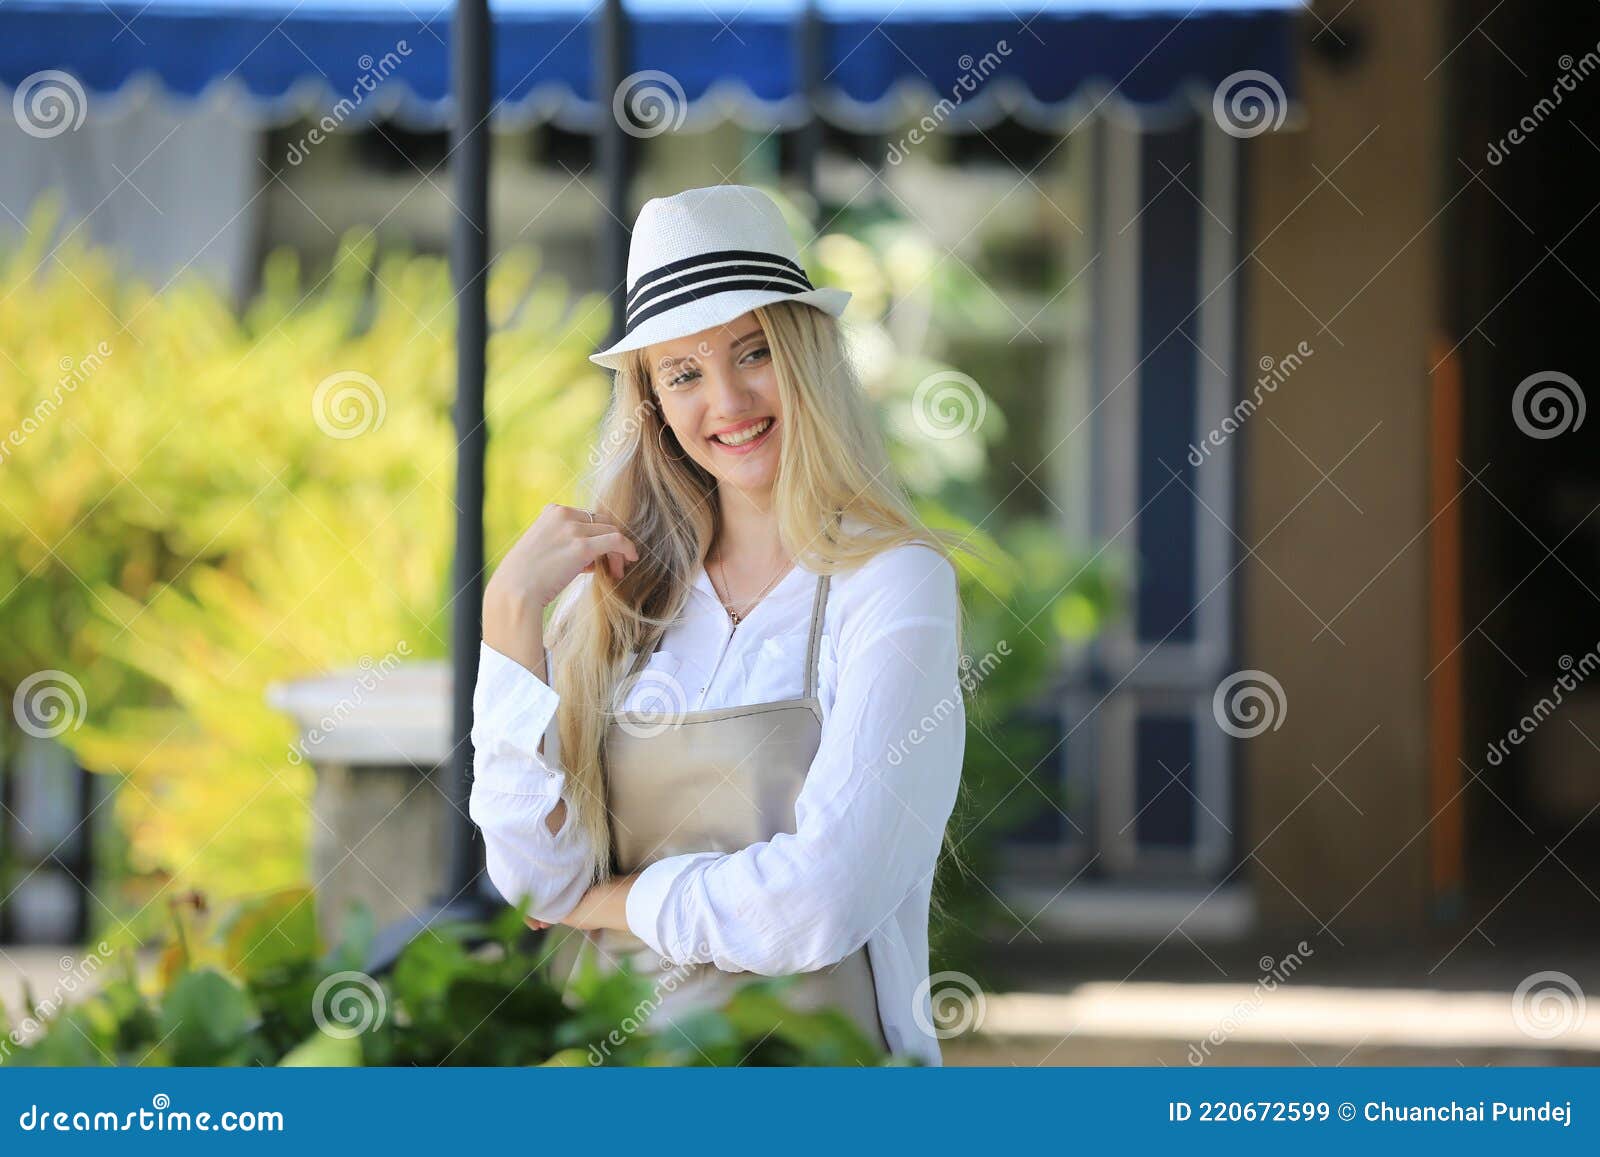 beautiful blonde hair girl standing with confidence in front of flower in open retails flora shop. small business owner concept